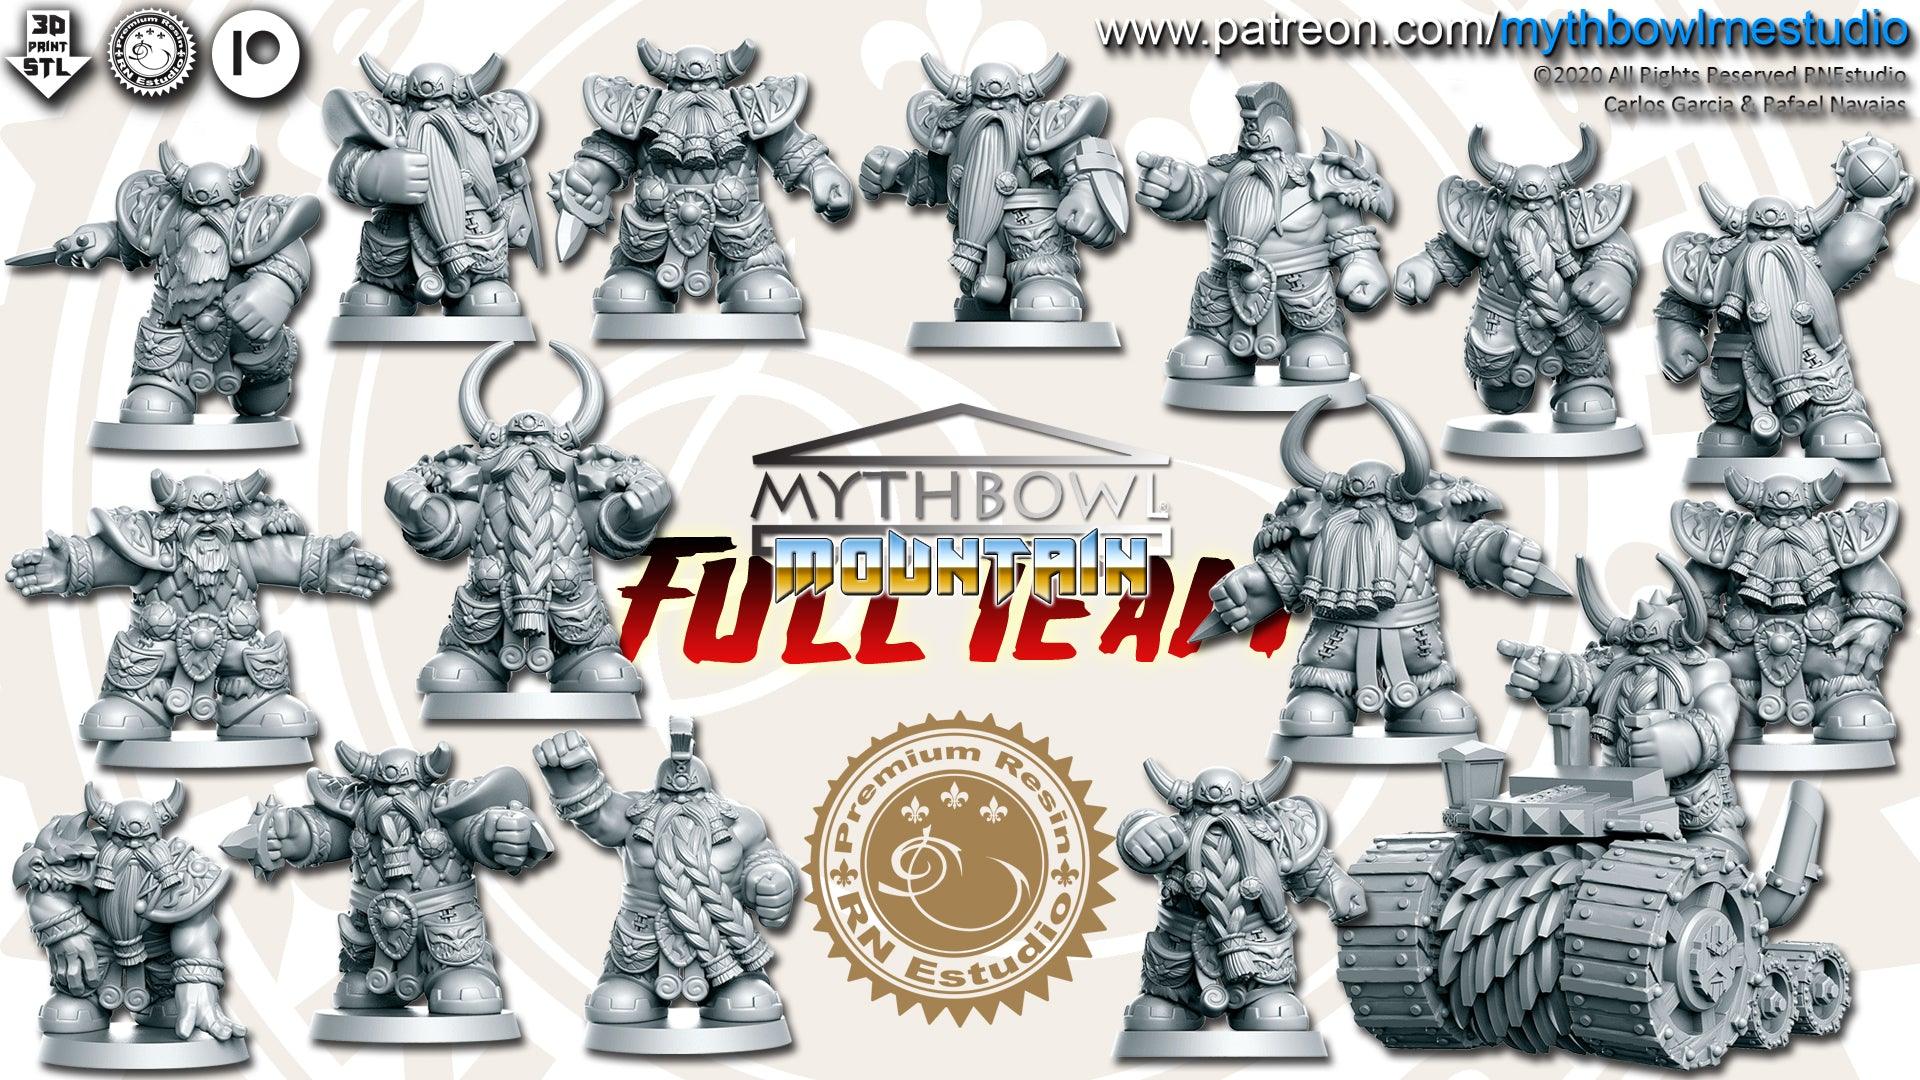 EQUIPO MOUNTAIN - BLOOD BOWL - TODO ROL SPAIN 